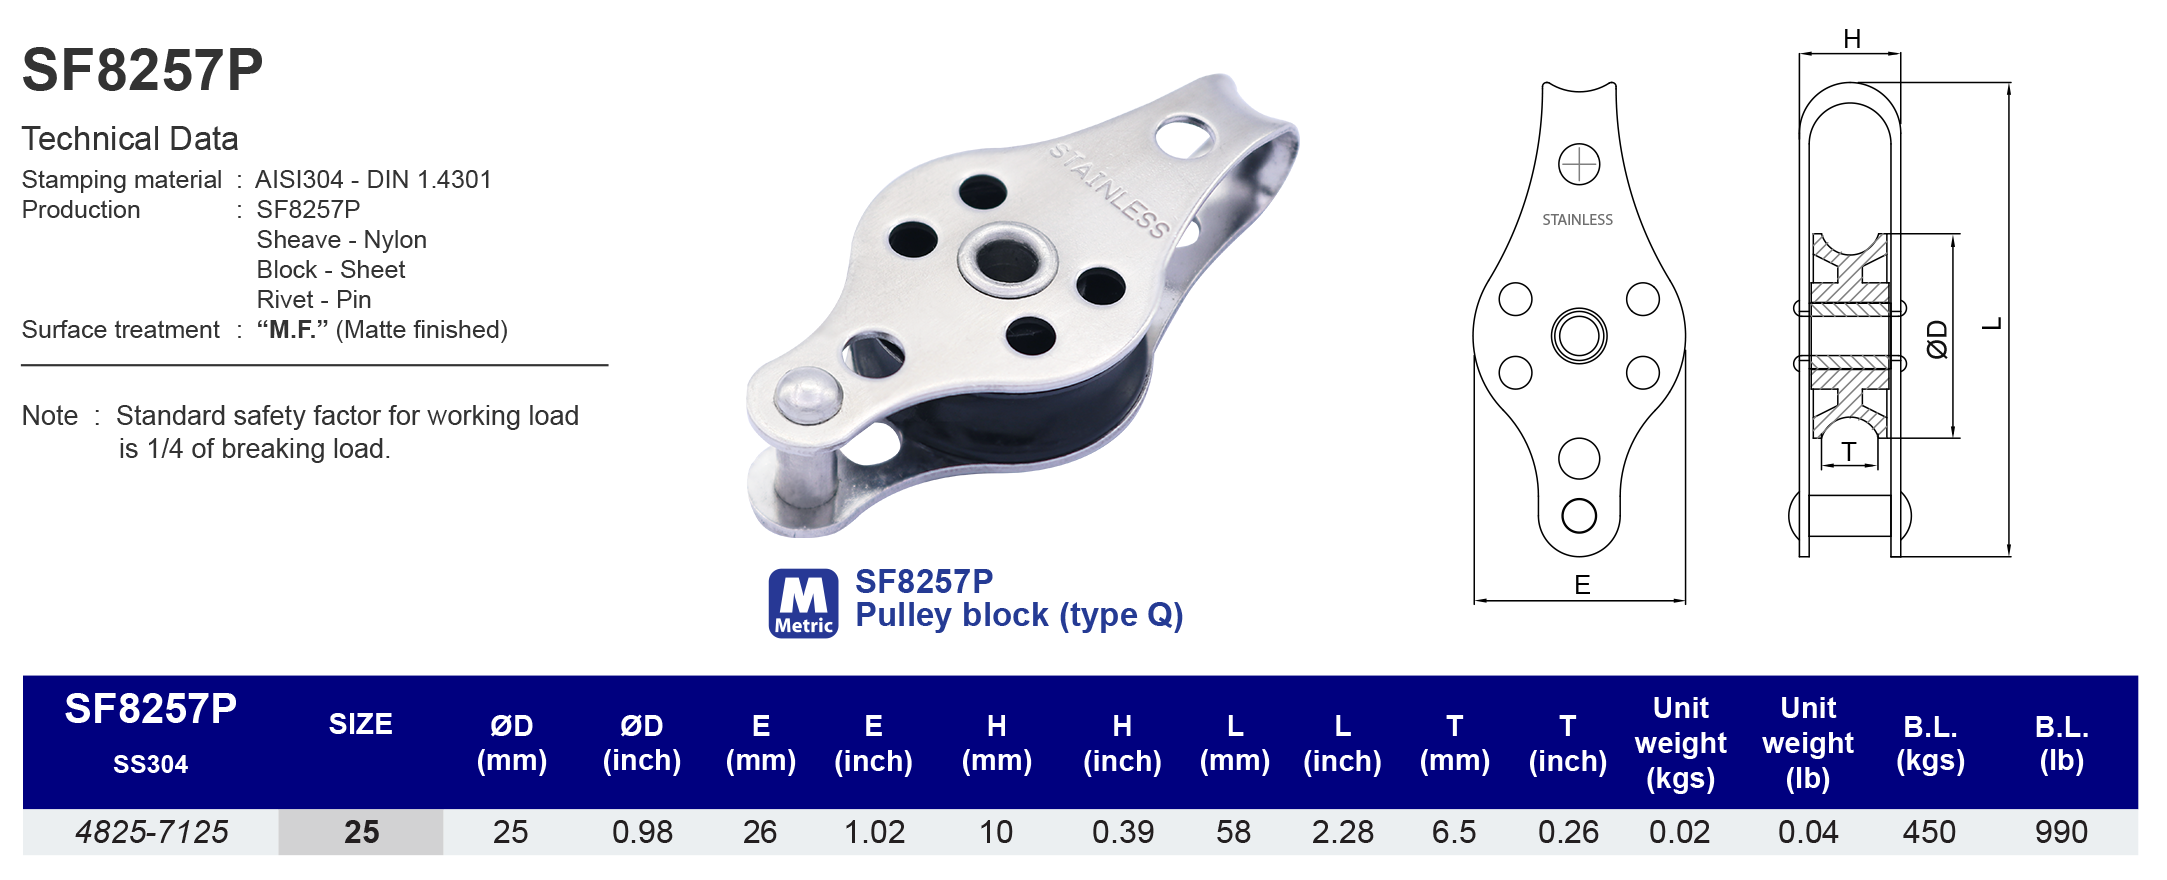 SF8257P Pulley block (type Q) - 304